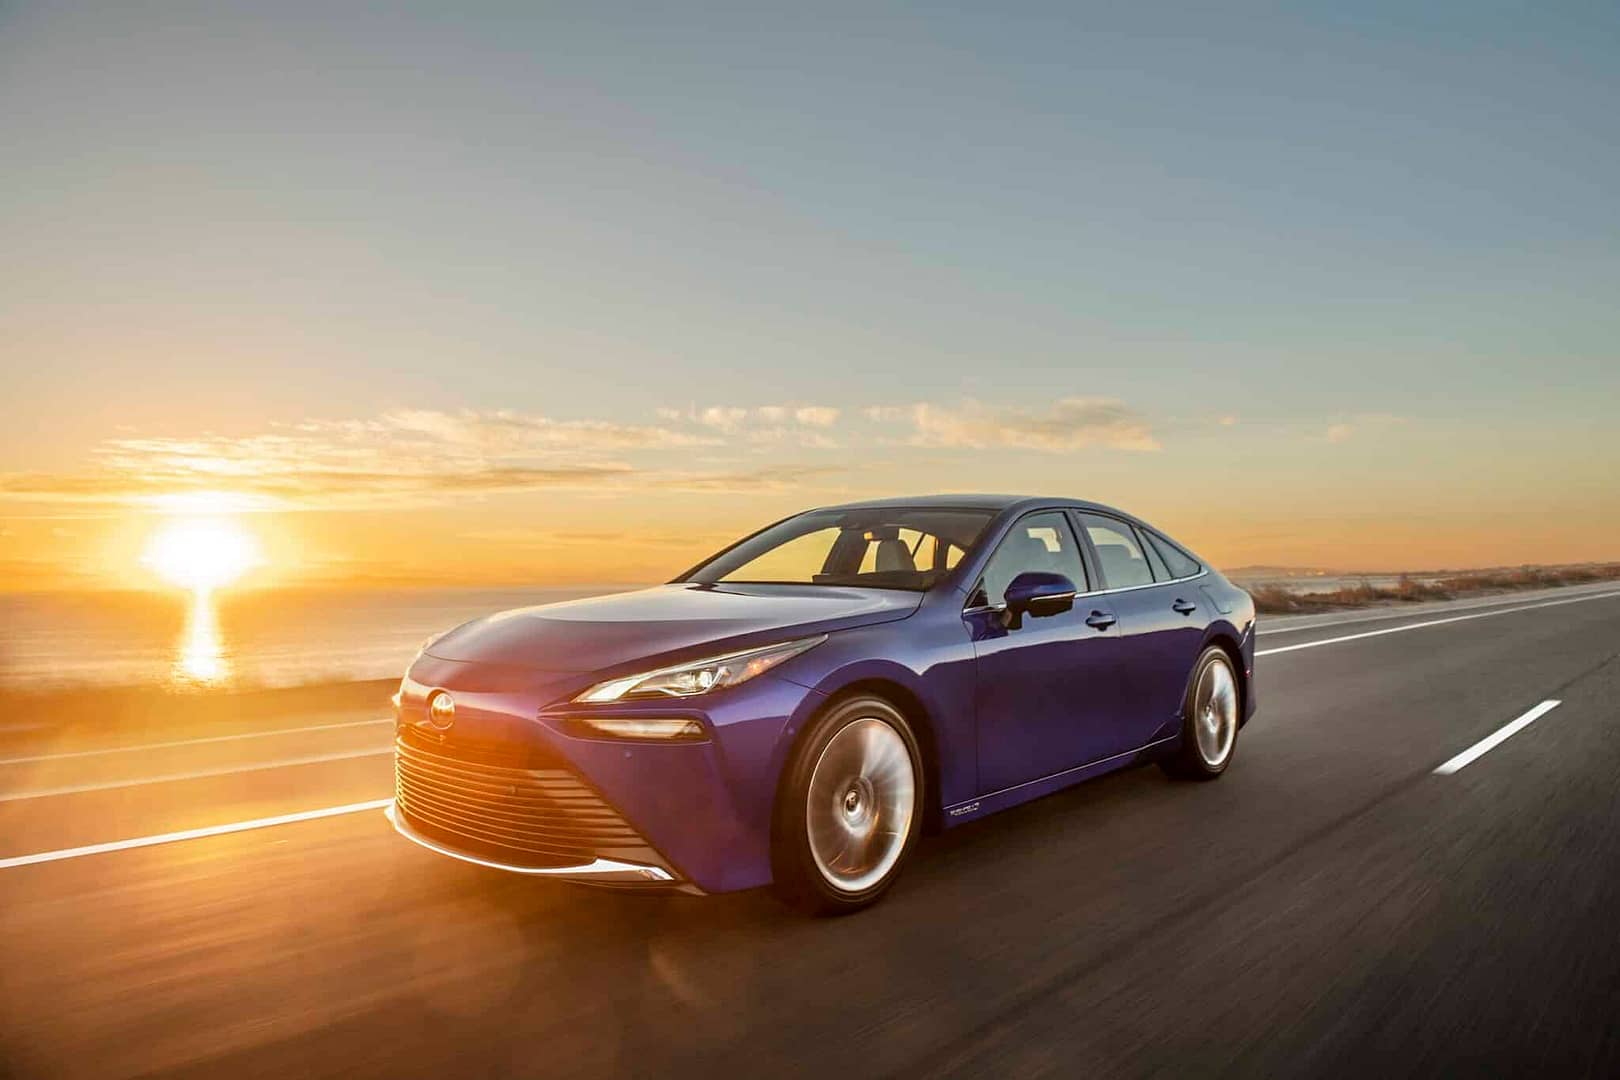 Toyota Highlights Its Efforts To Achieve Carbon Neutrality At ADIPEC 2022